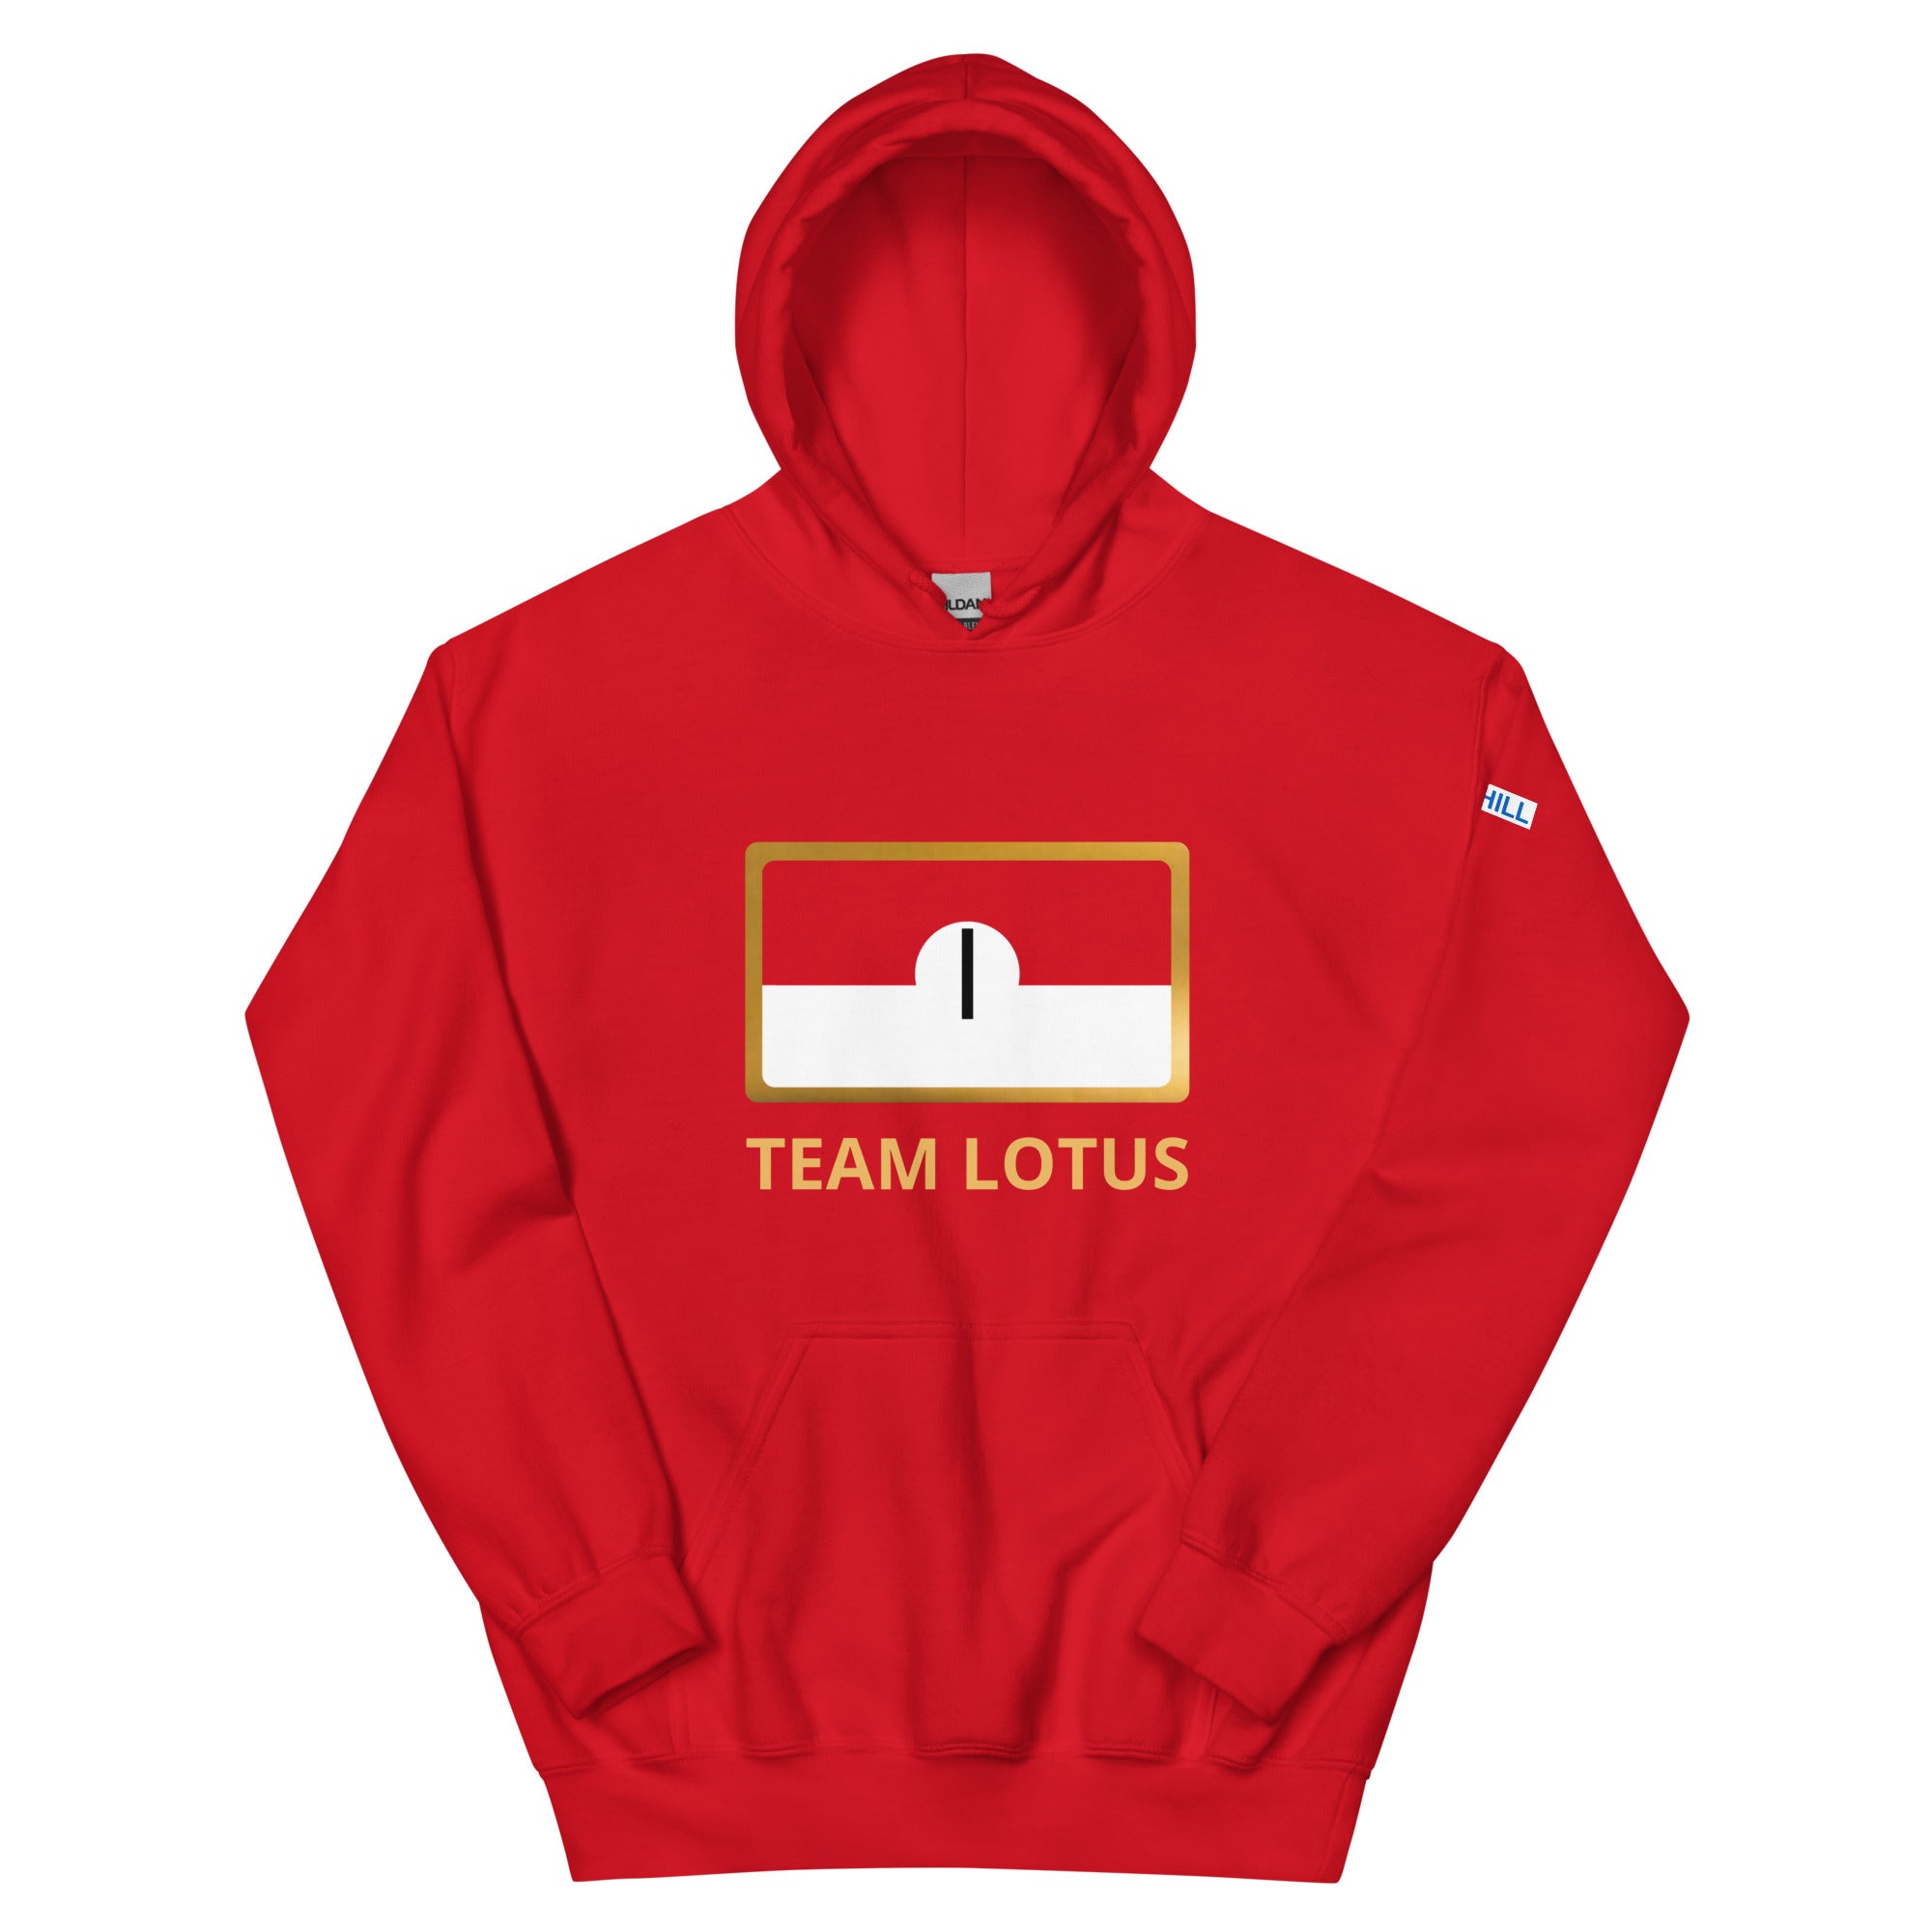 1: Hill Team Lotus 49B f1 world champion red hoodie front